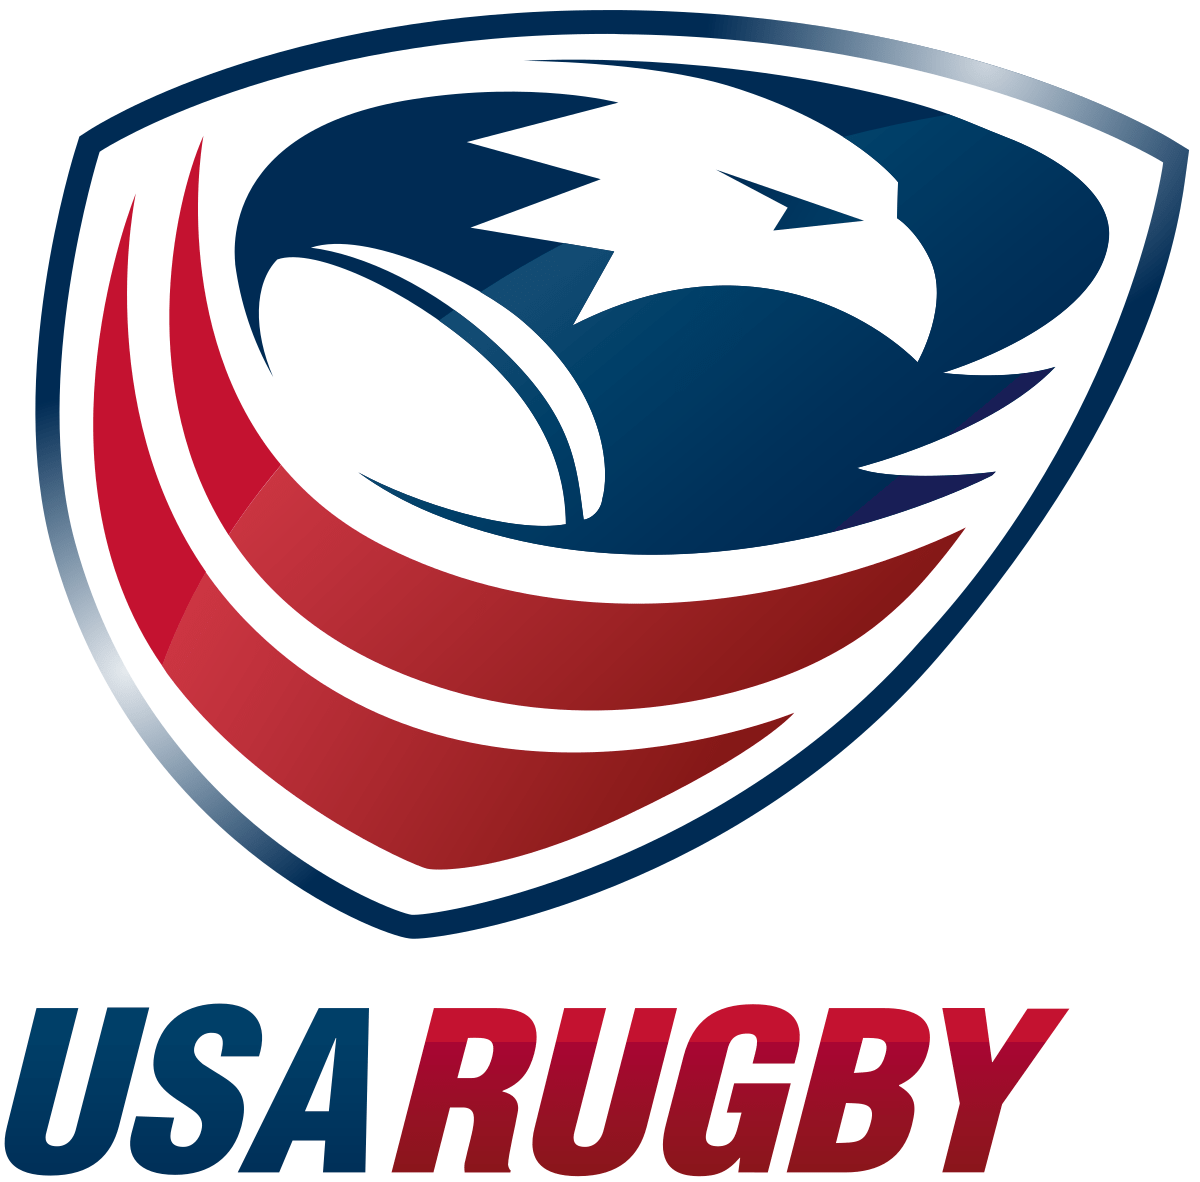 Footybite rugby streams